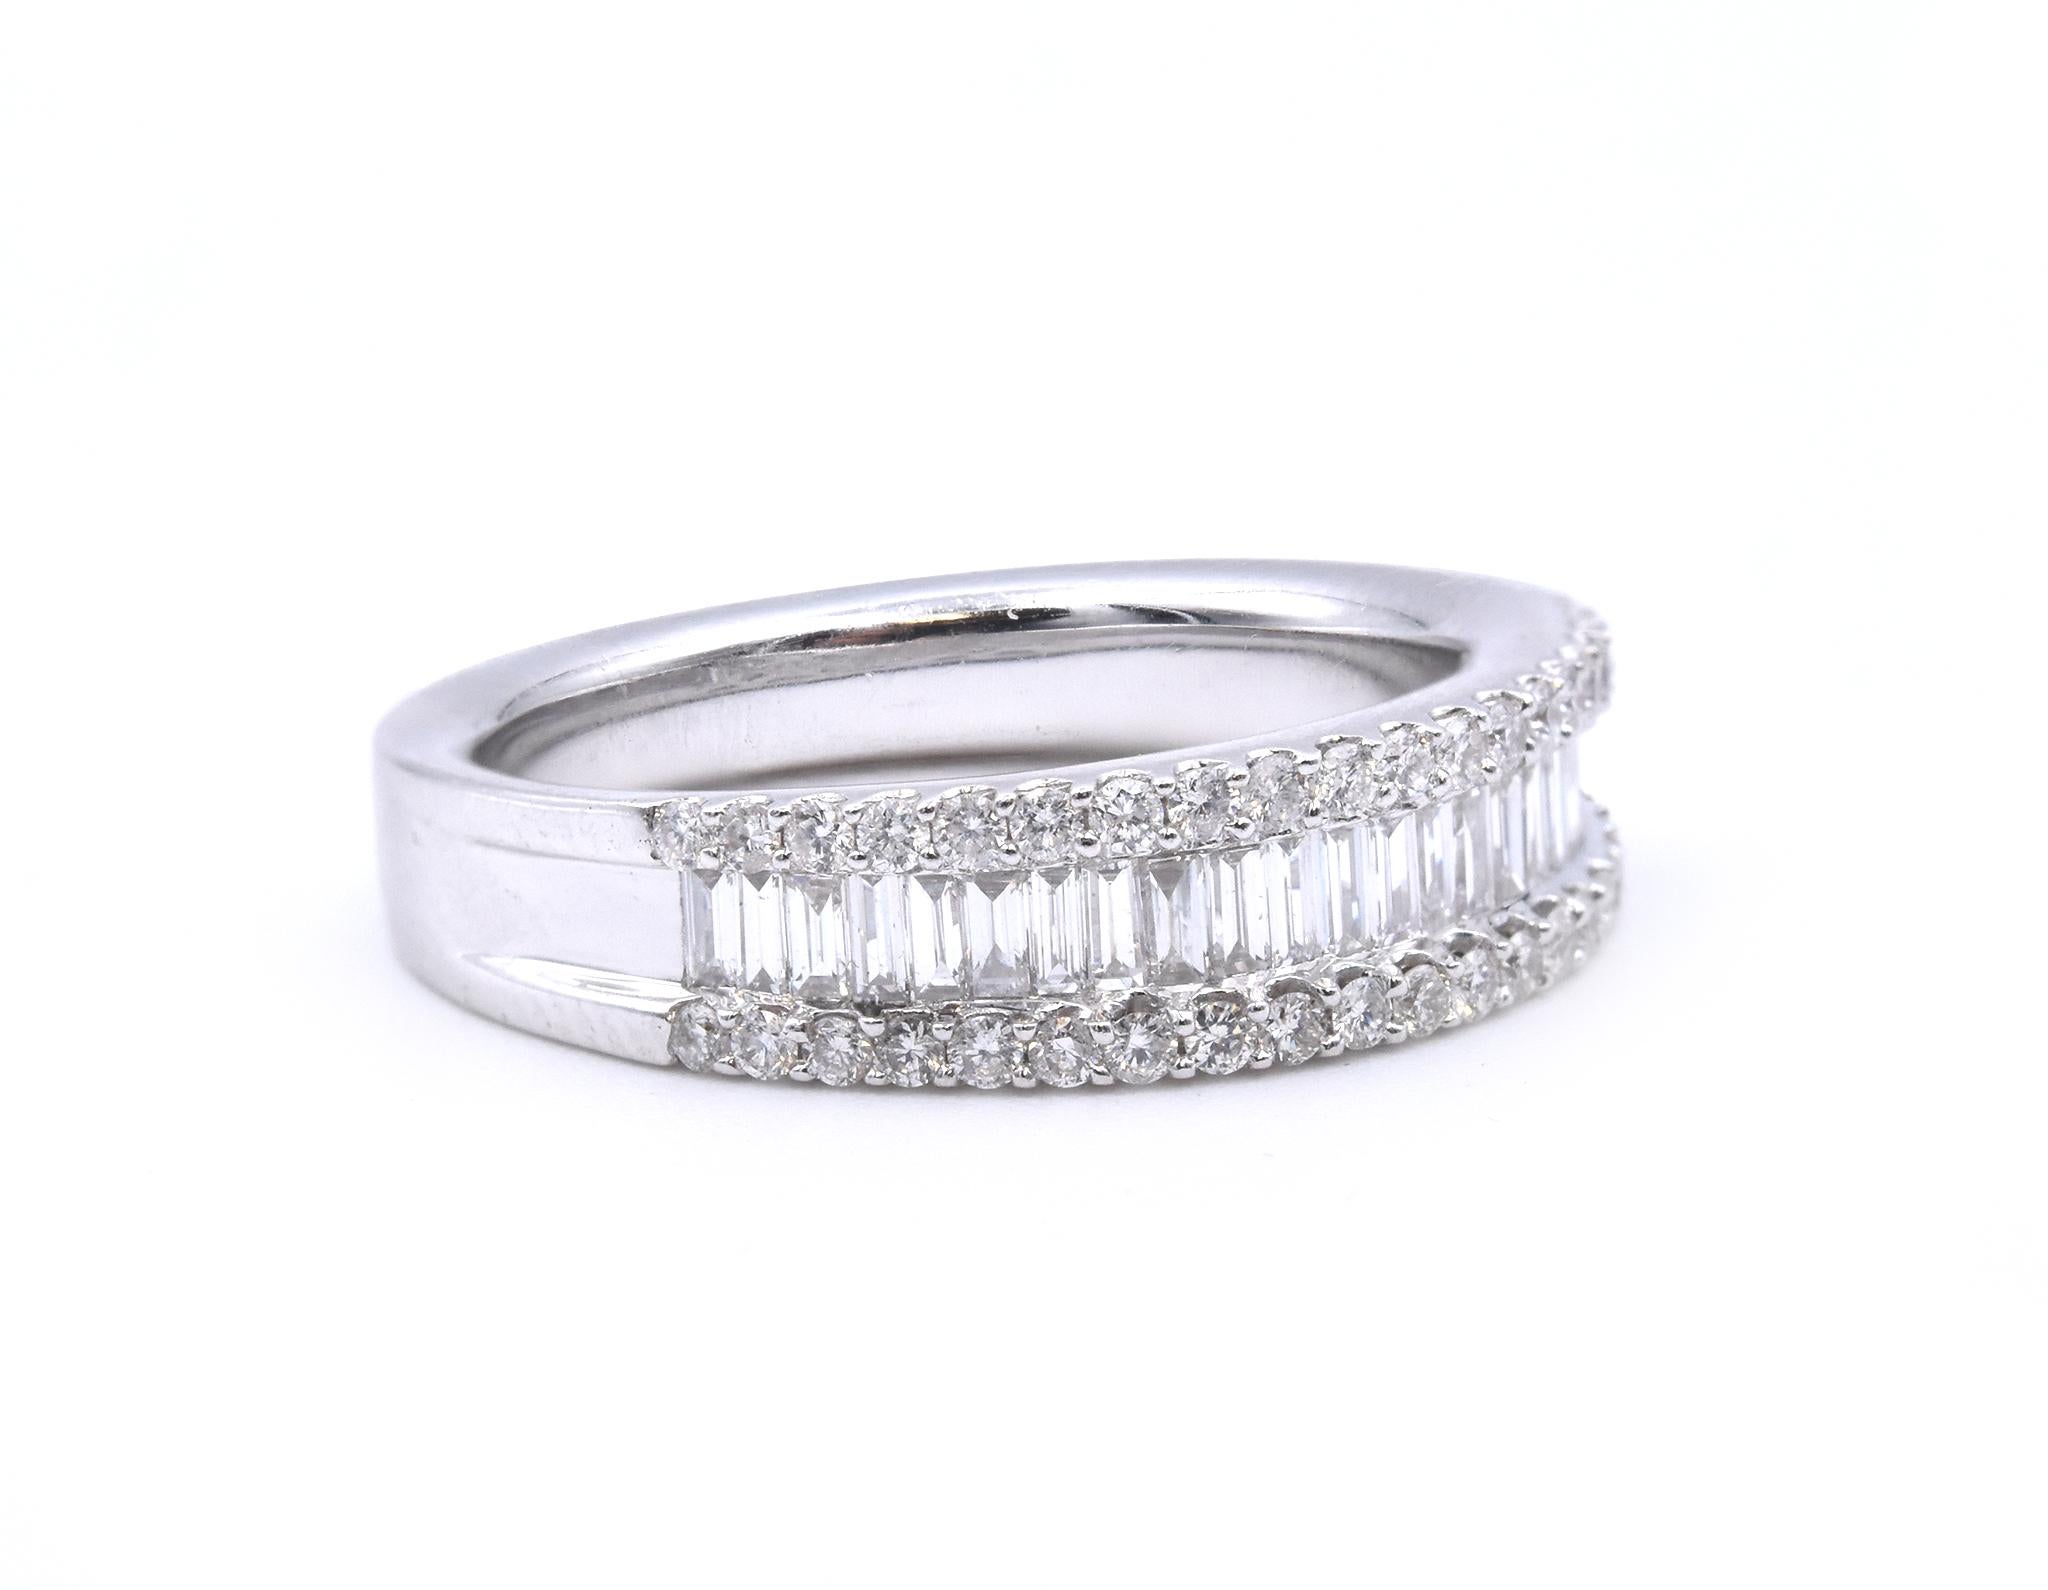 Designer: custom
Material: 18K white gold
Diamonds: 40 round cut and 20 baguette cut = .86cttw
Color: G
Clarity: VS
Size: 6.5 (please allow two additional shipping days for sizing requests)  
Weight: 5.49 grams
